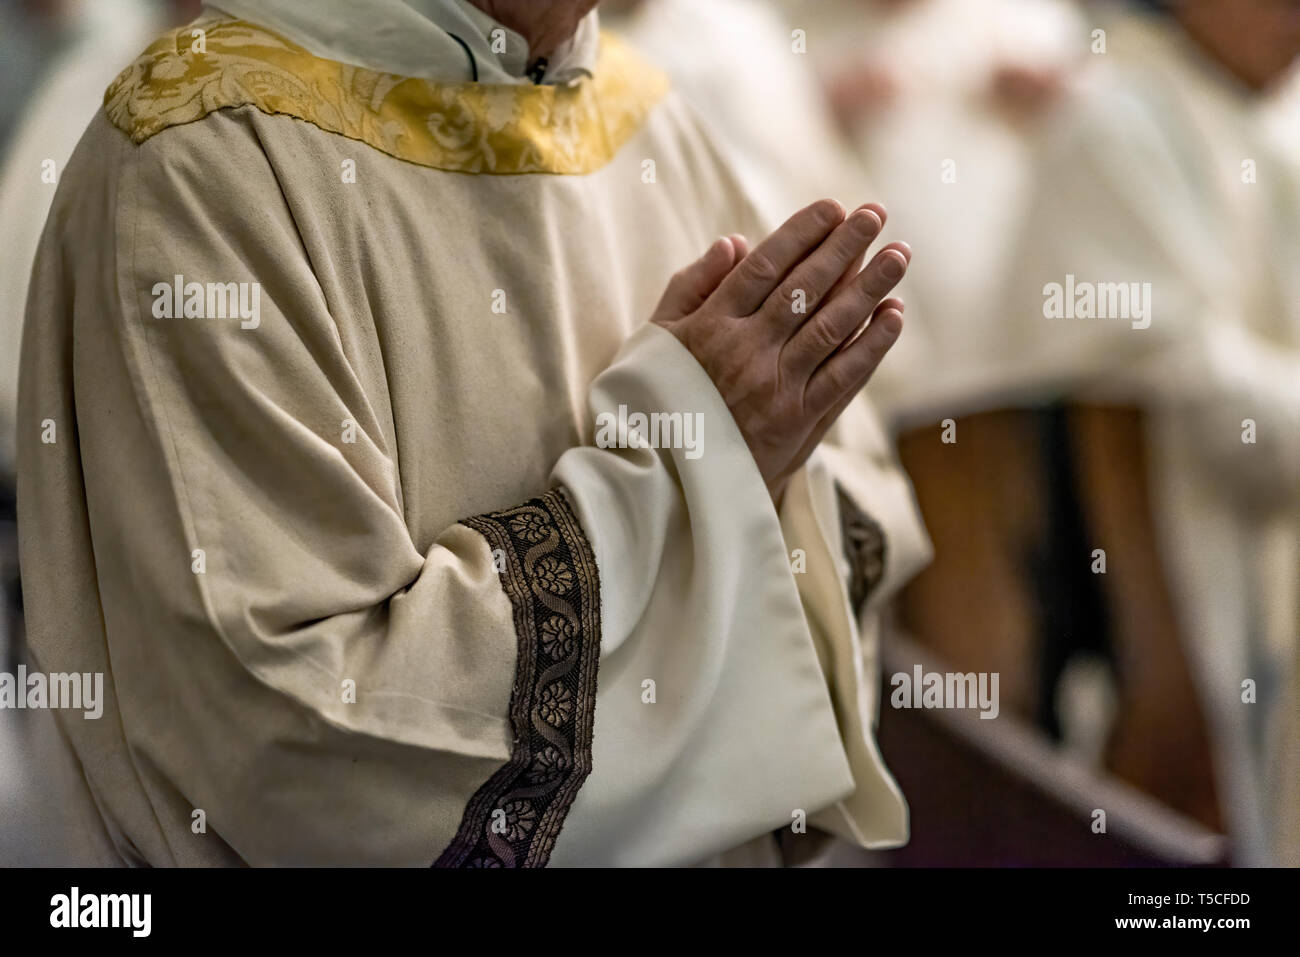 Priest with hands folded in prayer during Catholic mass. Stock Photo